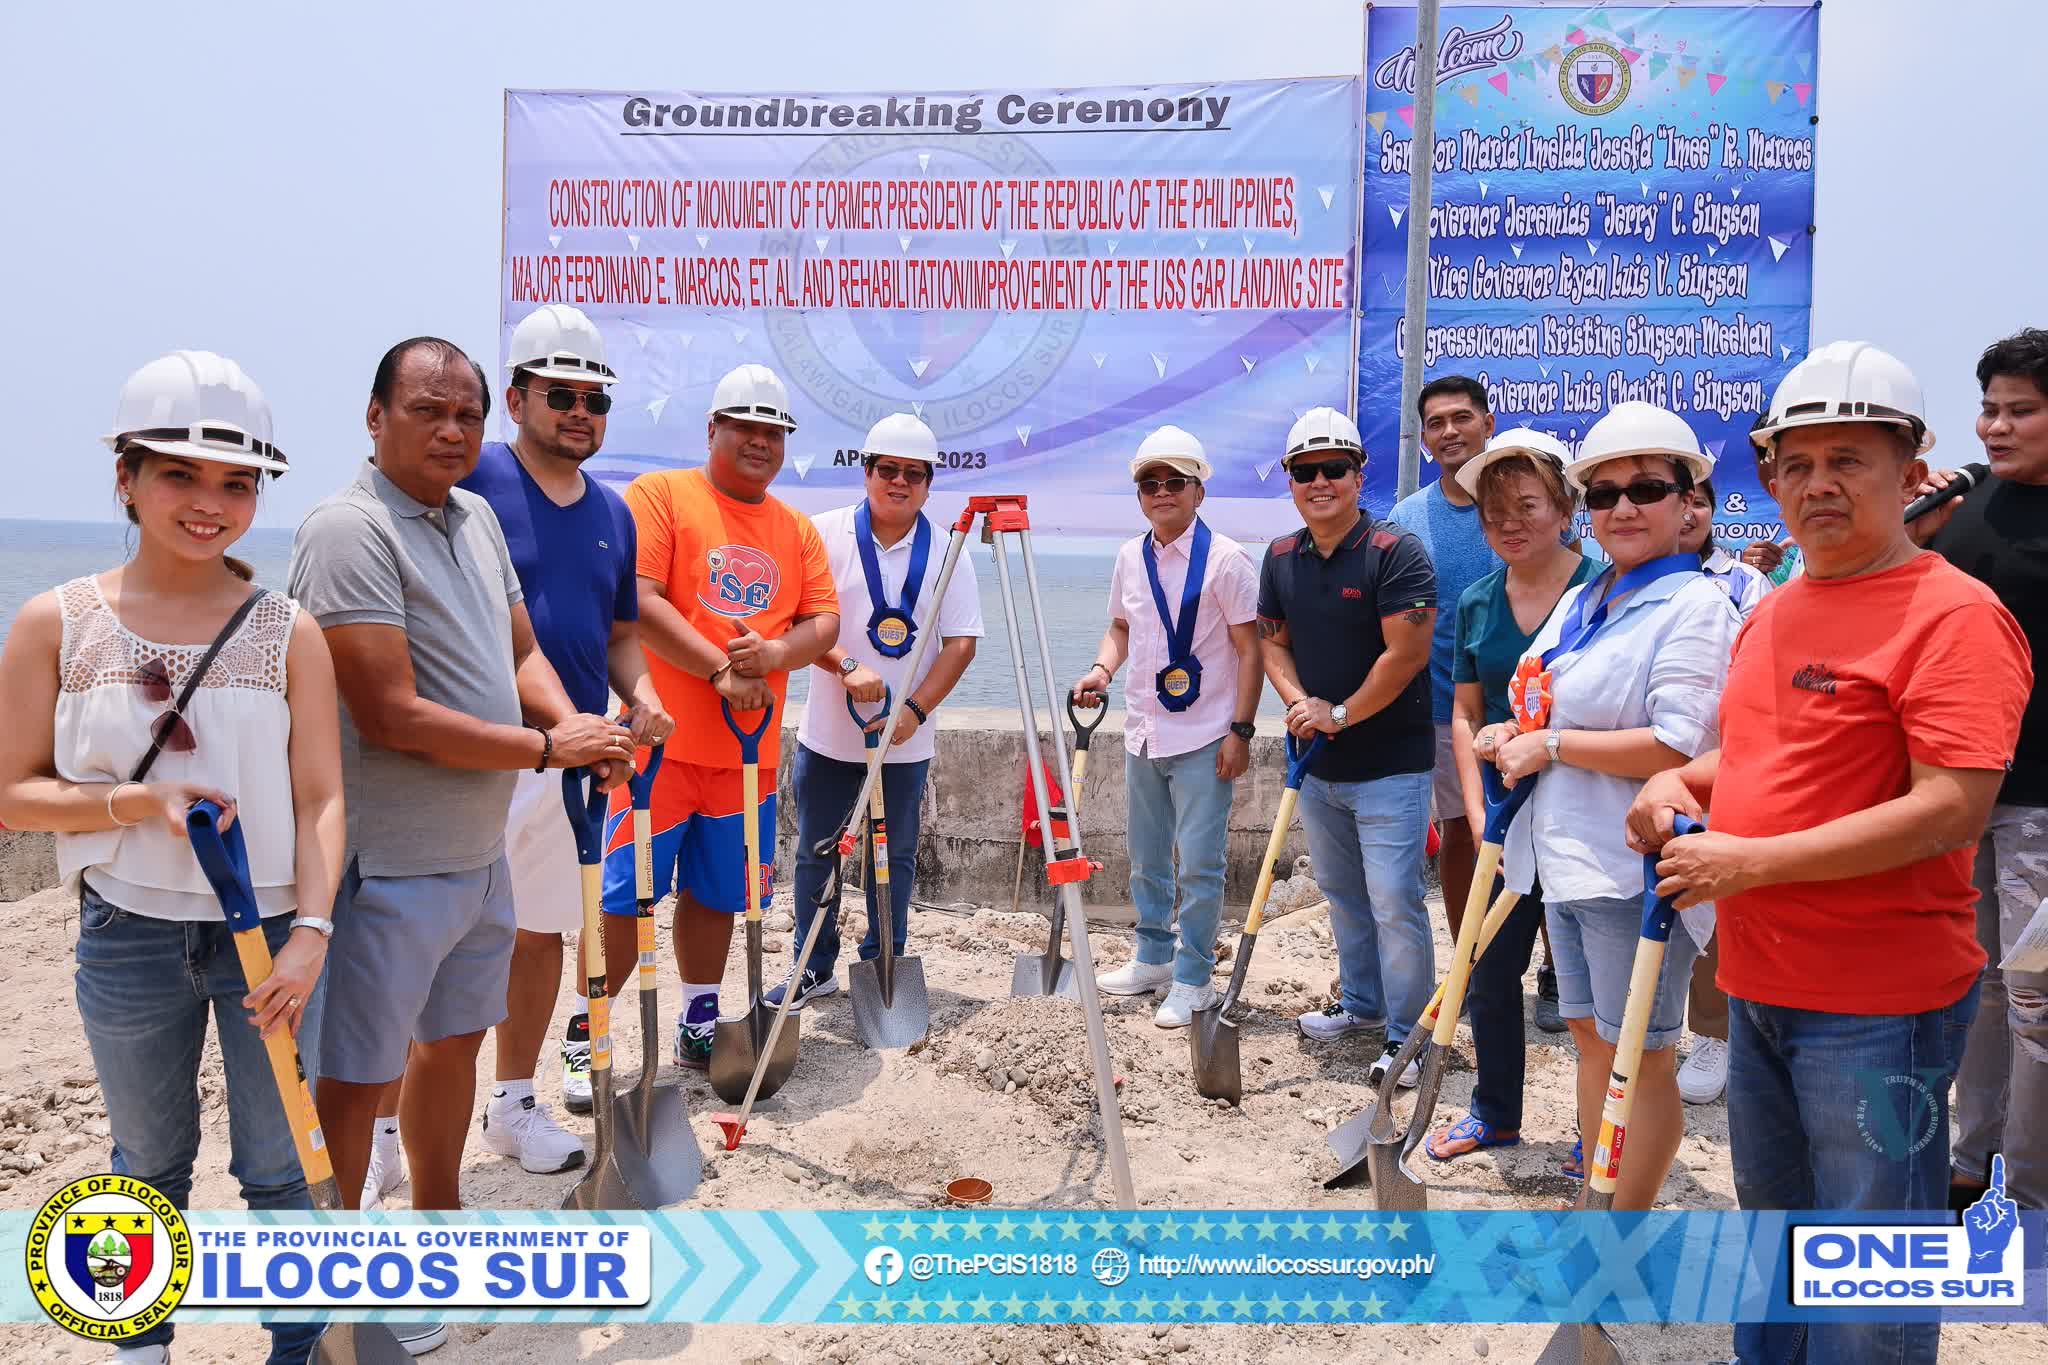 Groundbreaking ceremony in Apatot, San Sebastian, Ilocos Sur for the Marcos monument. Photo from the Provincial Government of Ilocos Sur’s Facebook page, April 21, 2023.